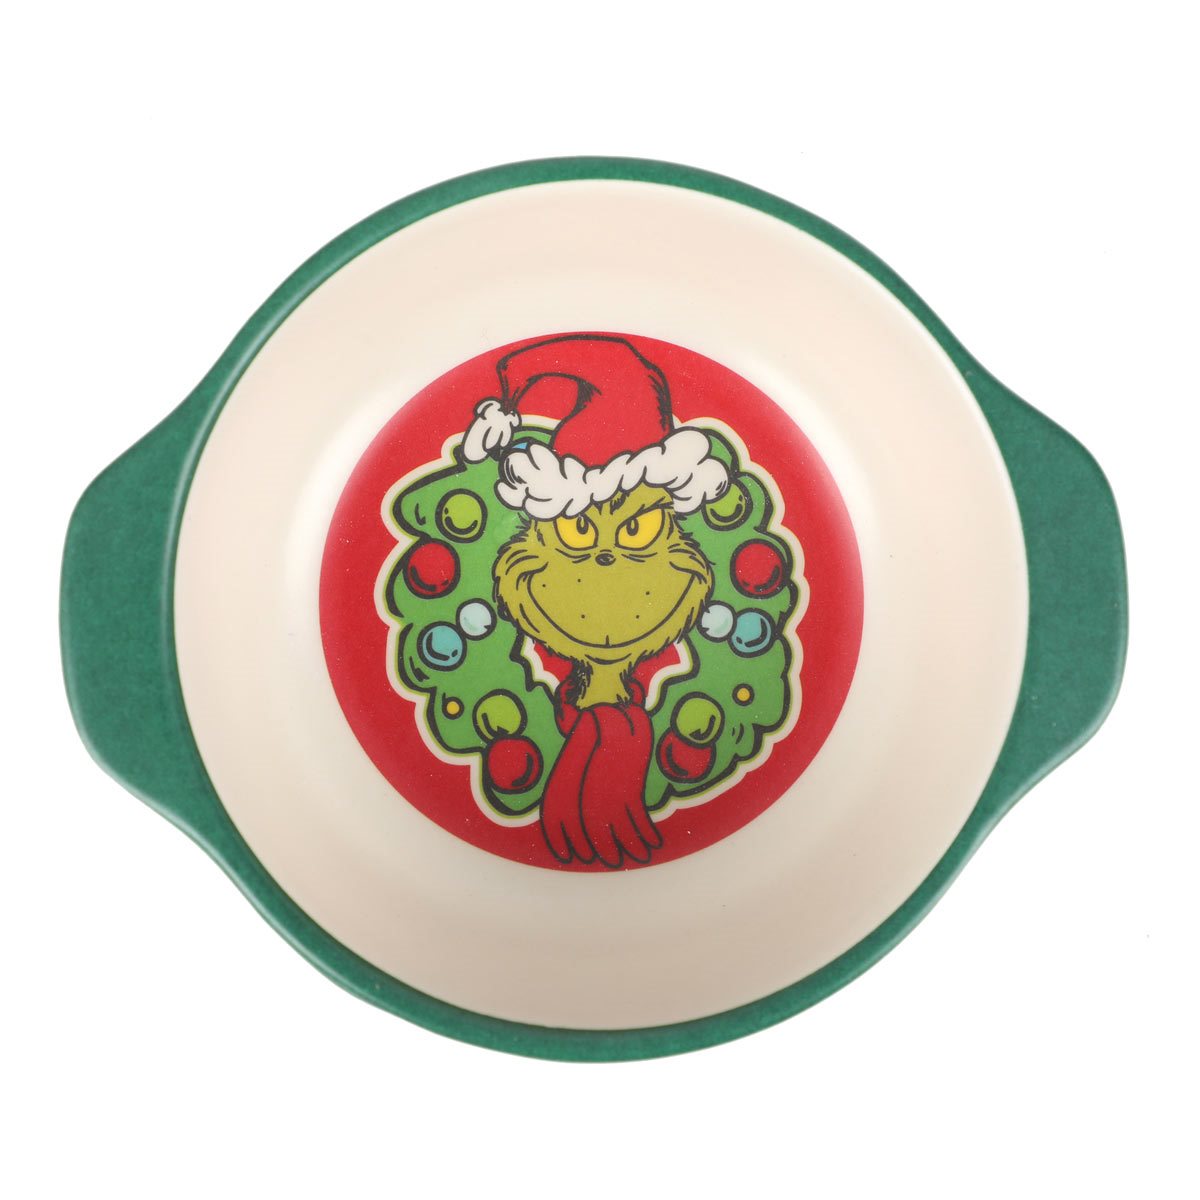 New The Grinch Bamboo Cup & Bowl with Lids & Straw